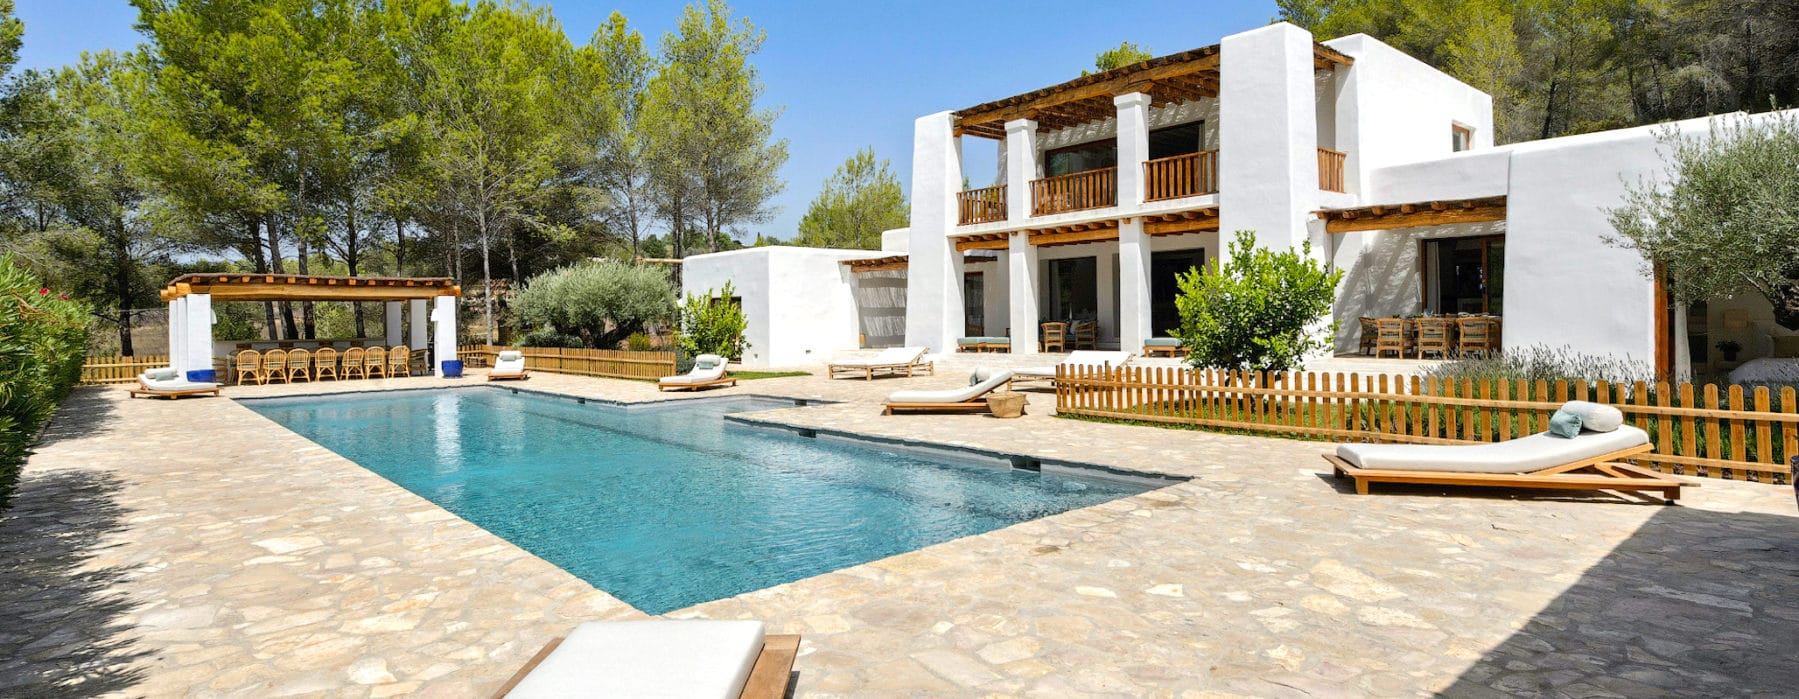 Side frontal view with pool of Ibiza's Villa Blakstad